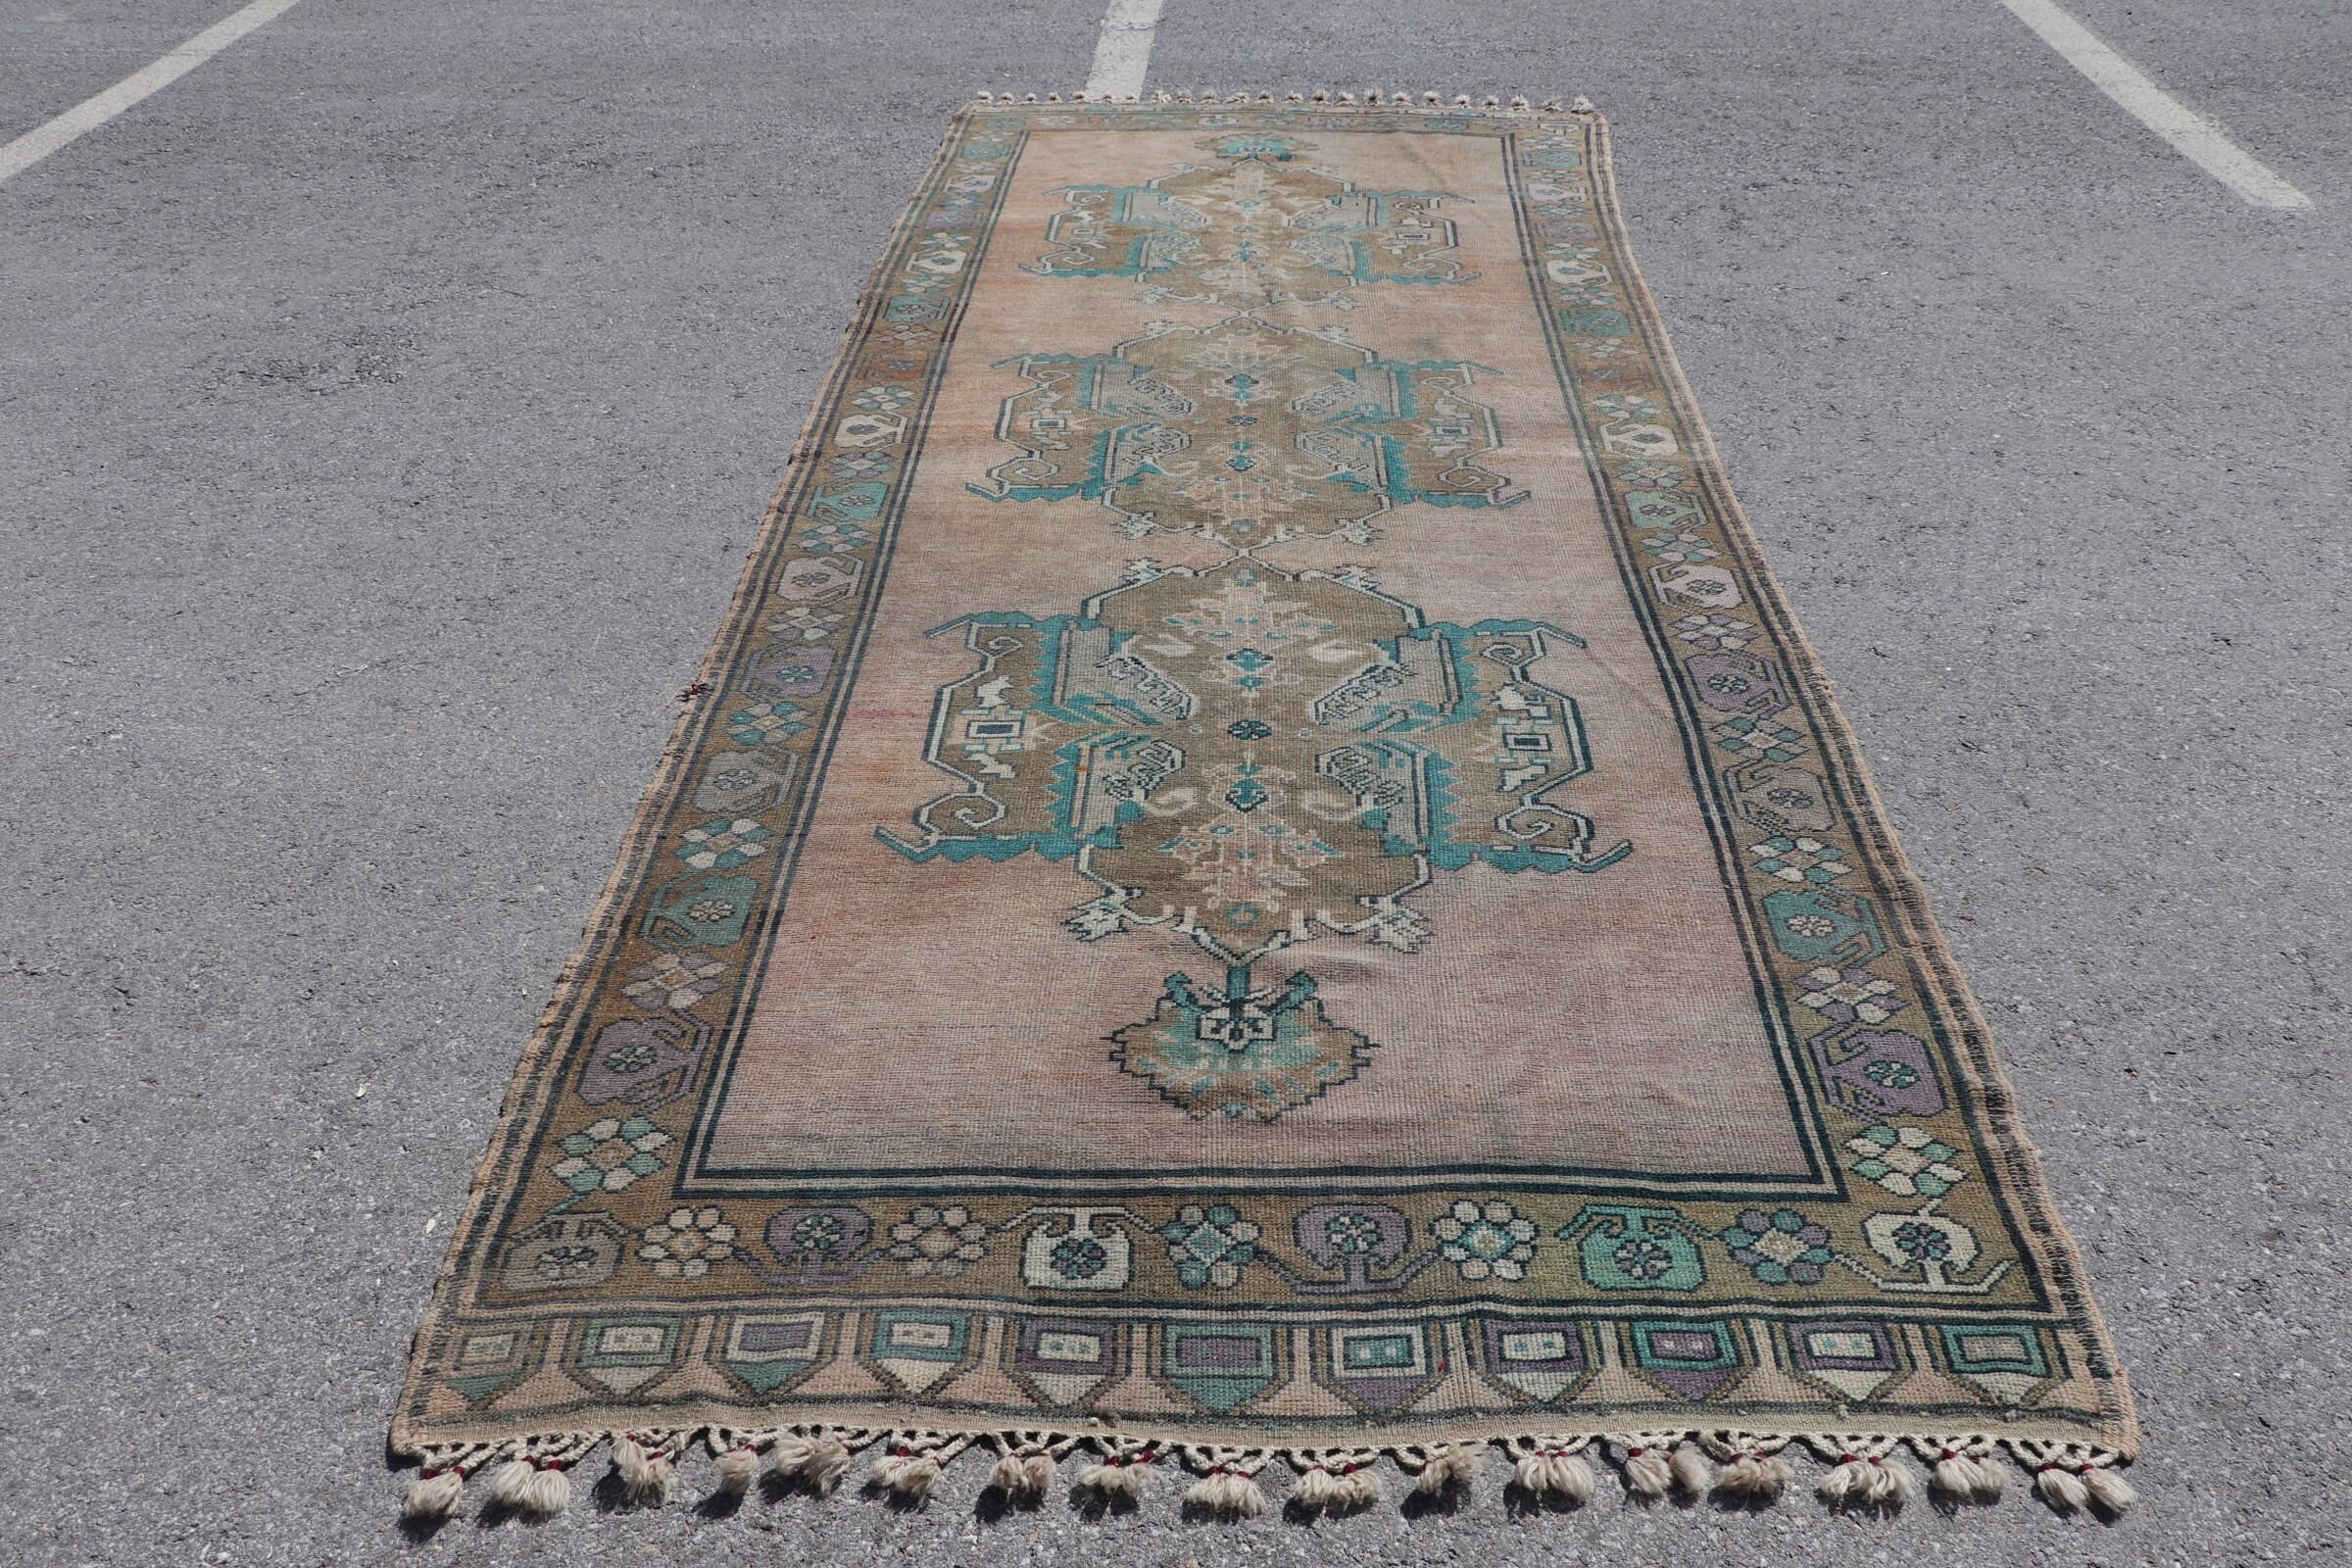 Pale Rug, Turkish Rug, Anatolian Rugs, Cool Rugs, 4.9x12.5 ft Runner Rugs, Kitchen Rug, Rugs for Stair, Vintage Rugs, Green Home Decor Rug